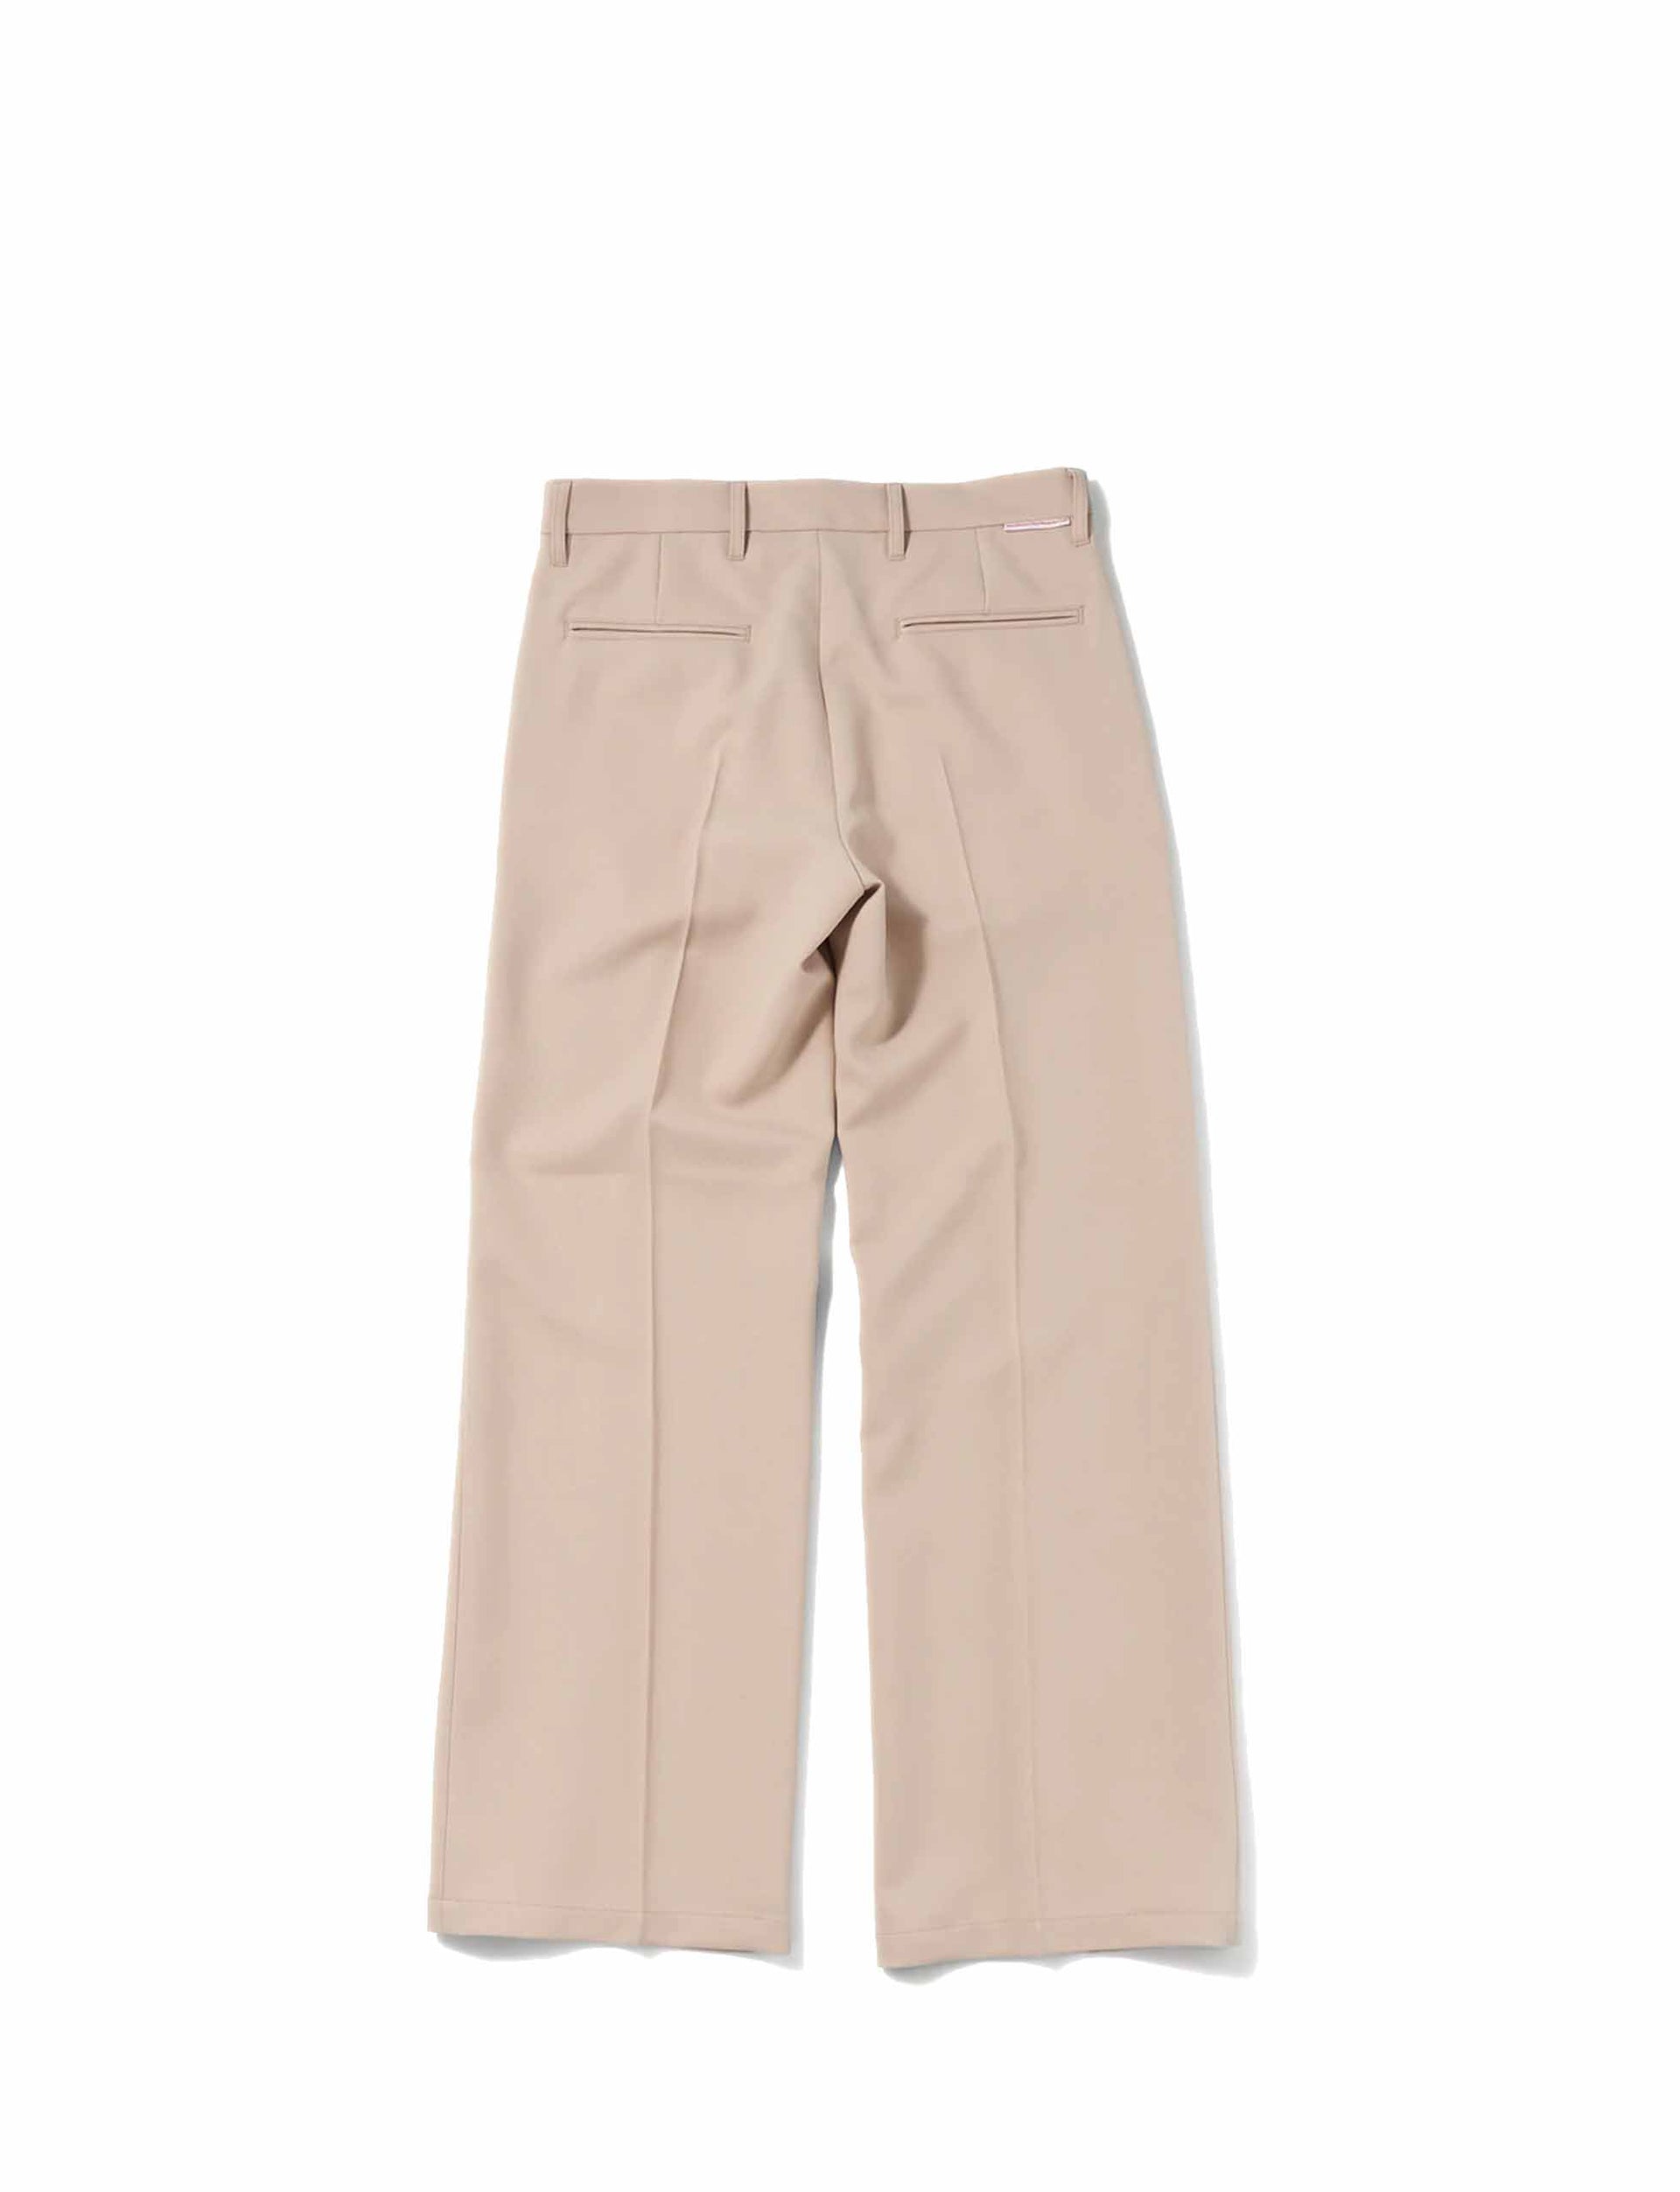 STOCKHOLM (SURFBOARD) CLUB sune sand trousers